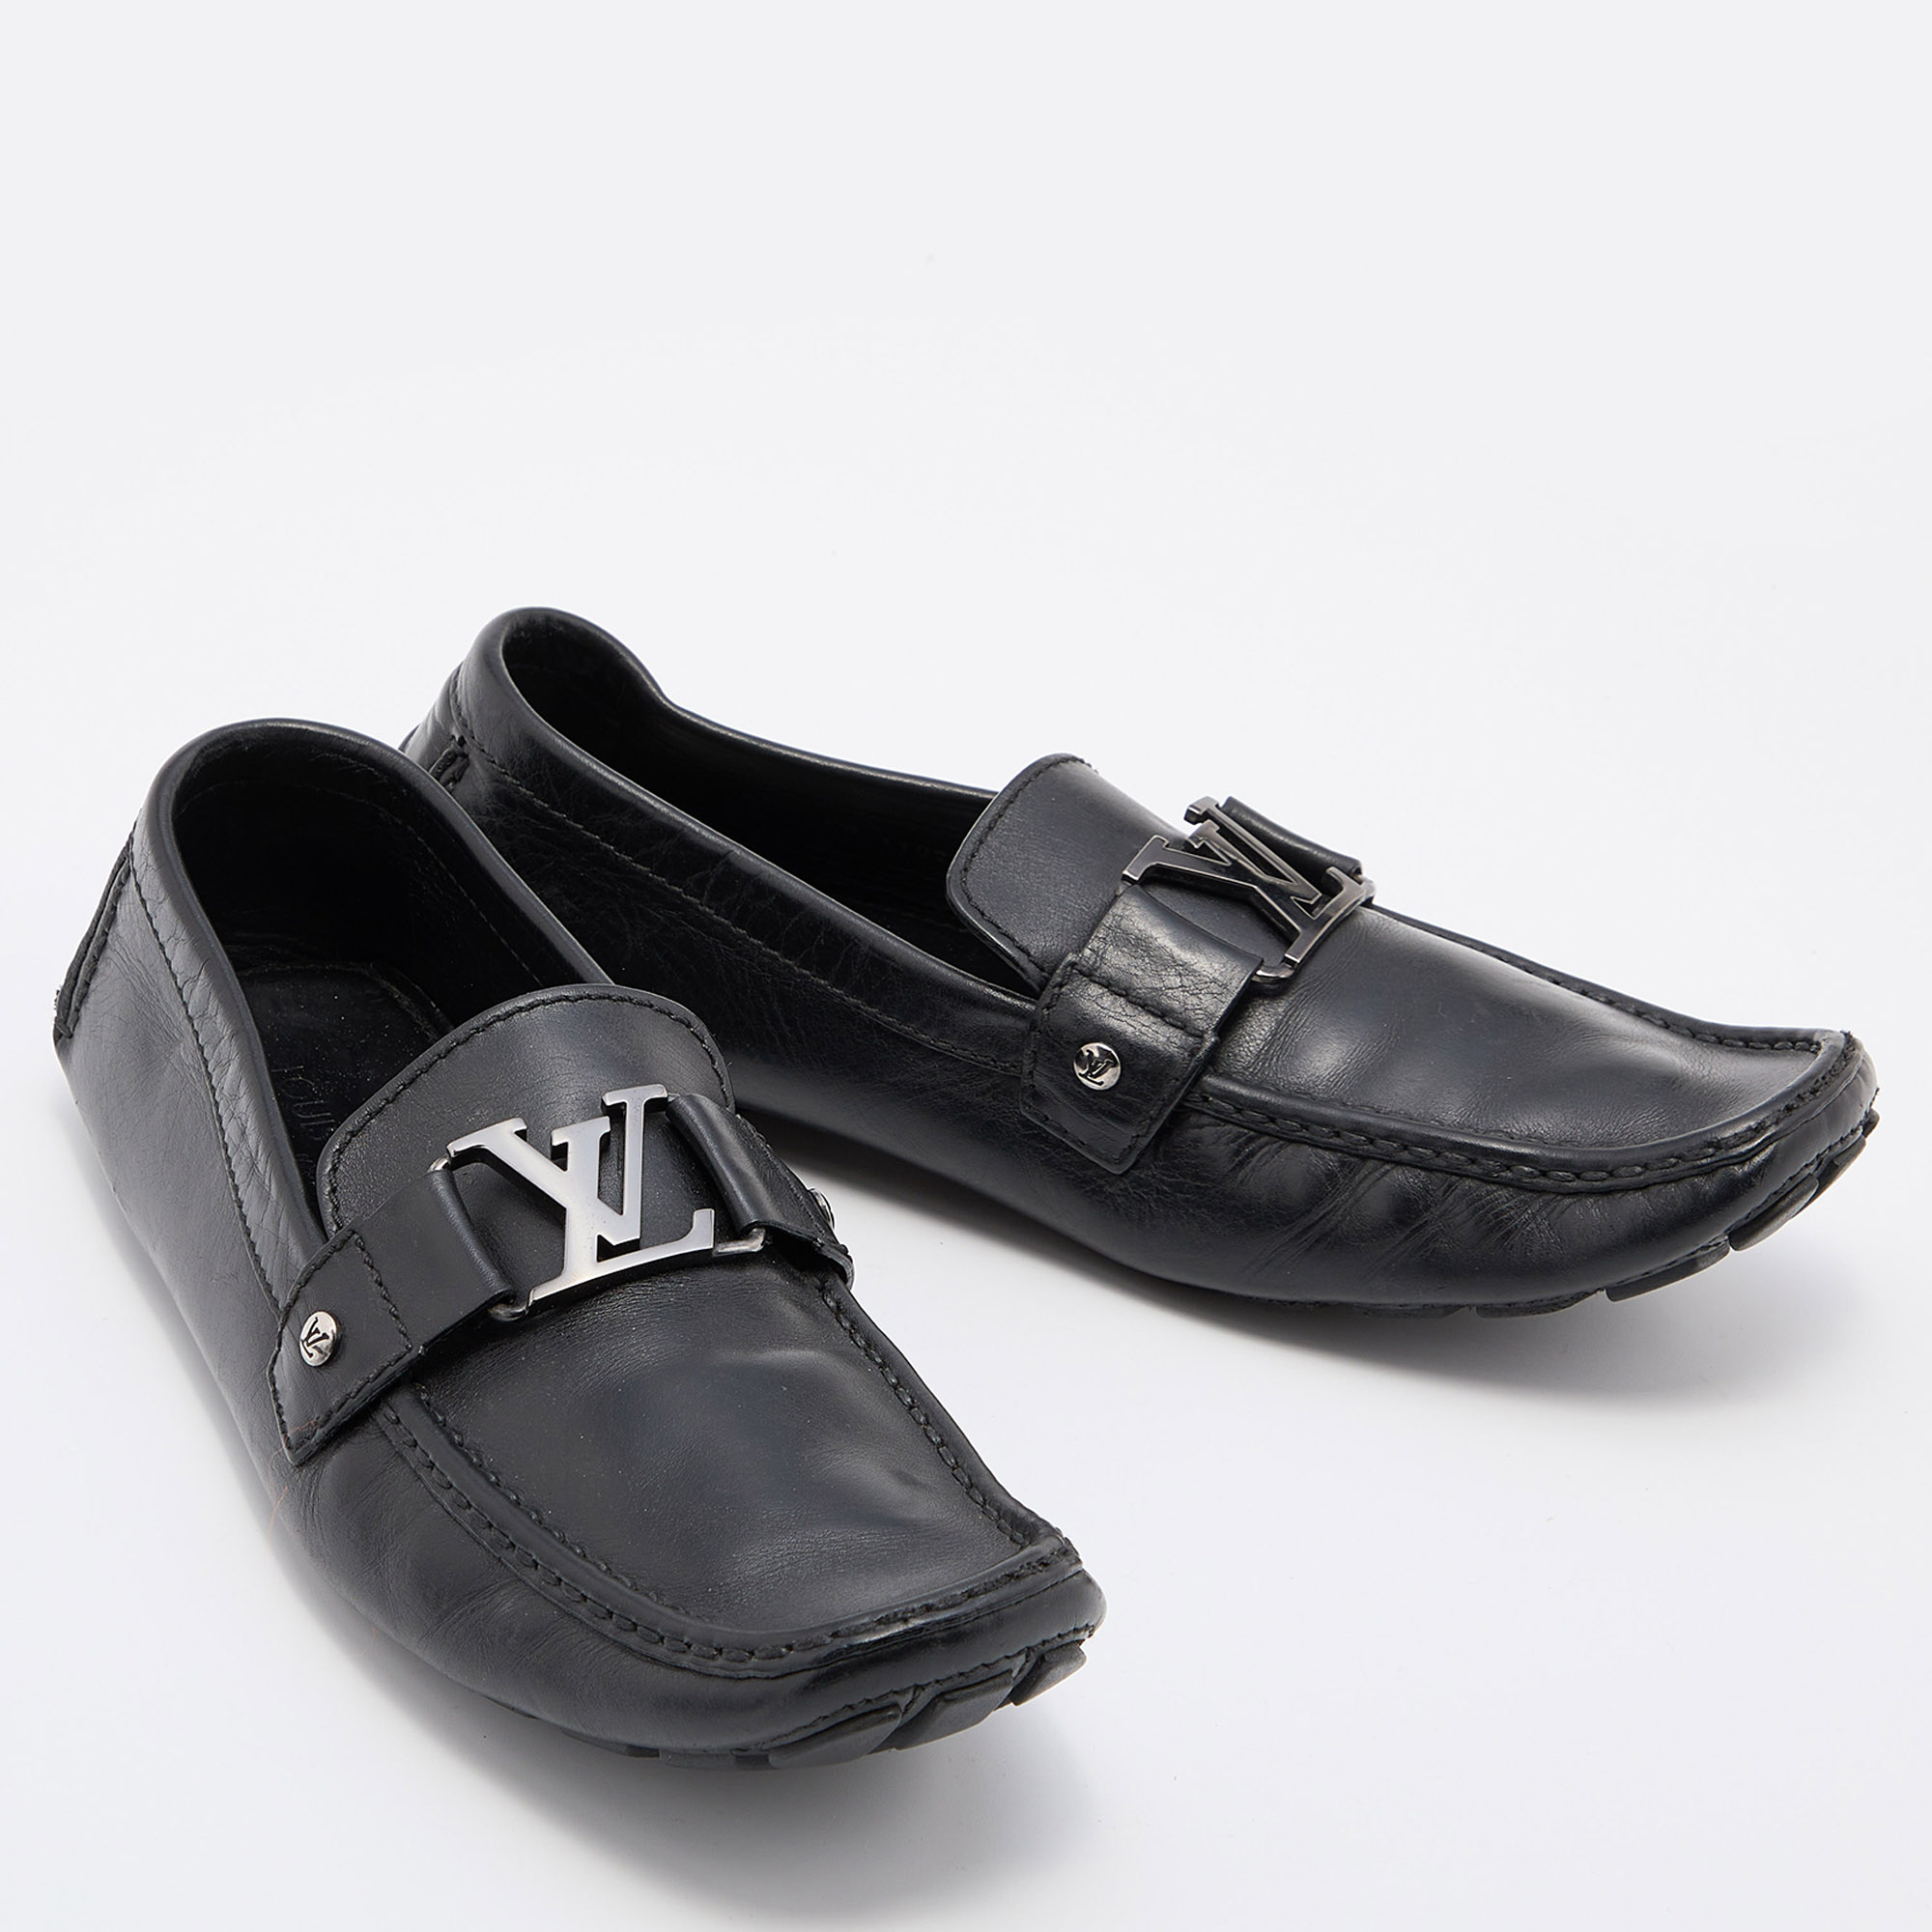 Louis Vuitton Black Leather Monte Carlo Slip On Loafers Size 43.5